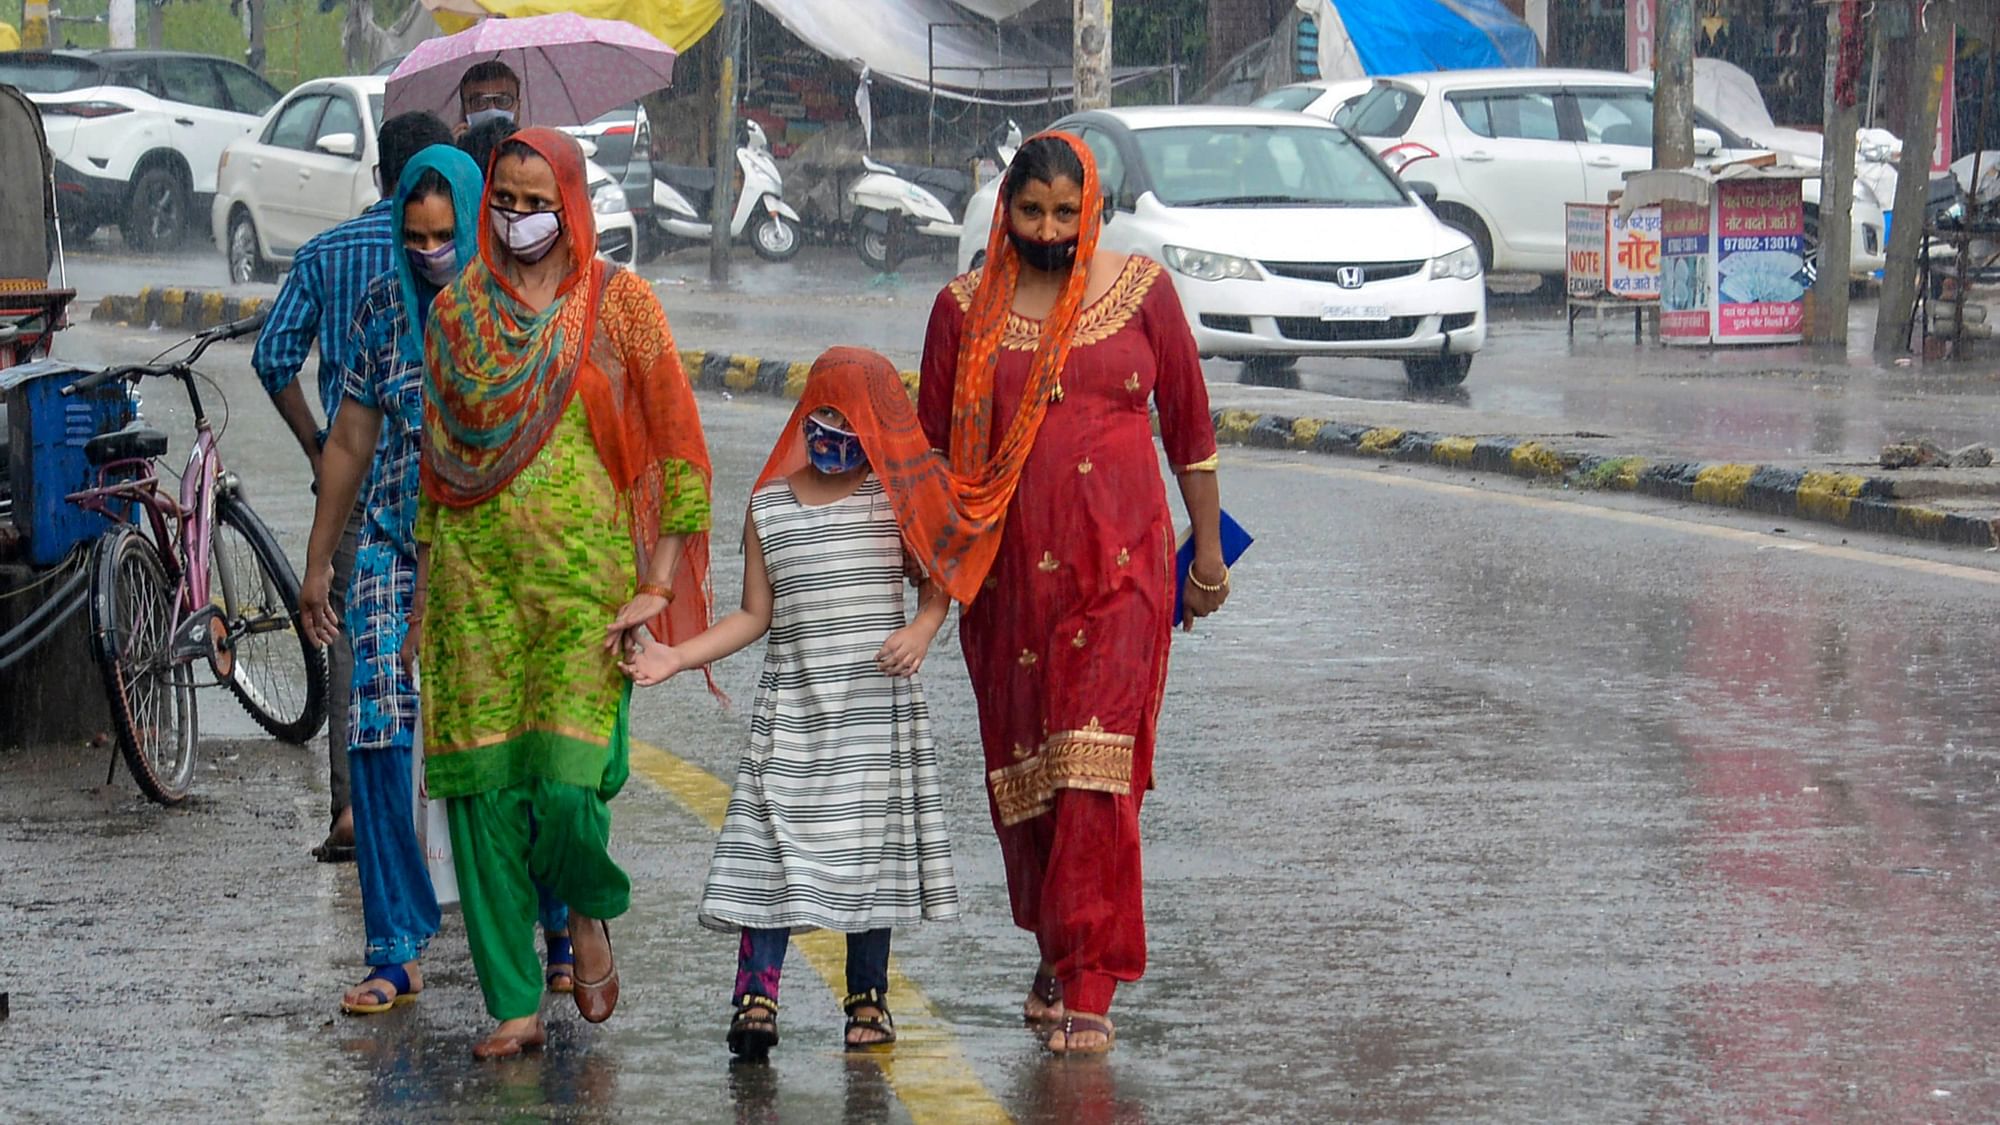 People walk through rain in Jalandhar on Wednesday, 24 June. Image used for representation only.